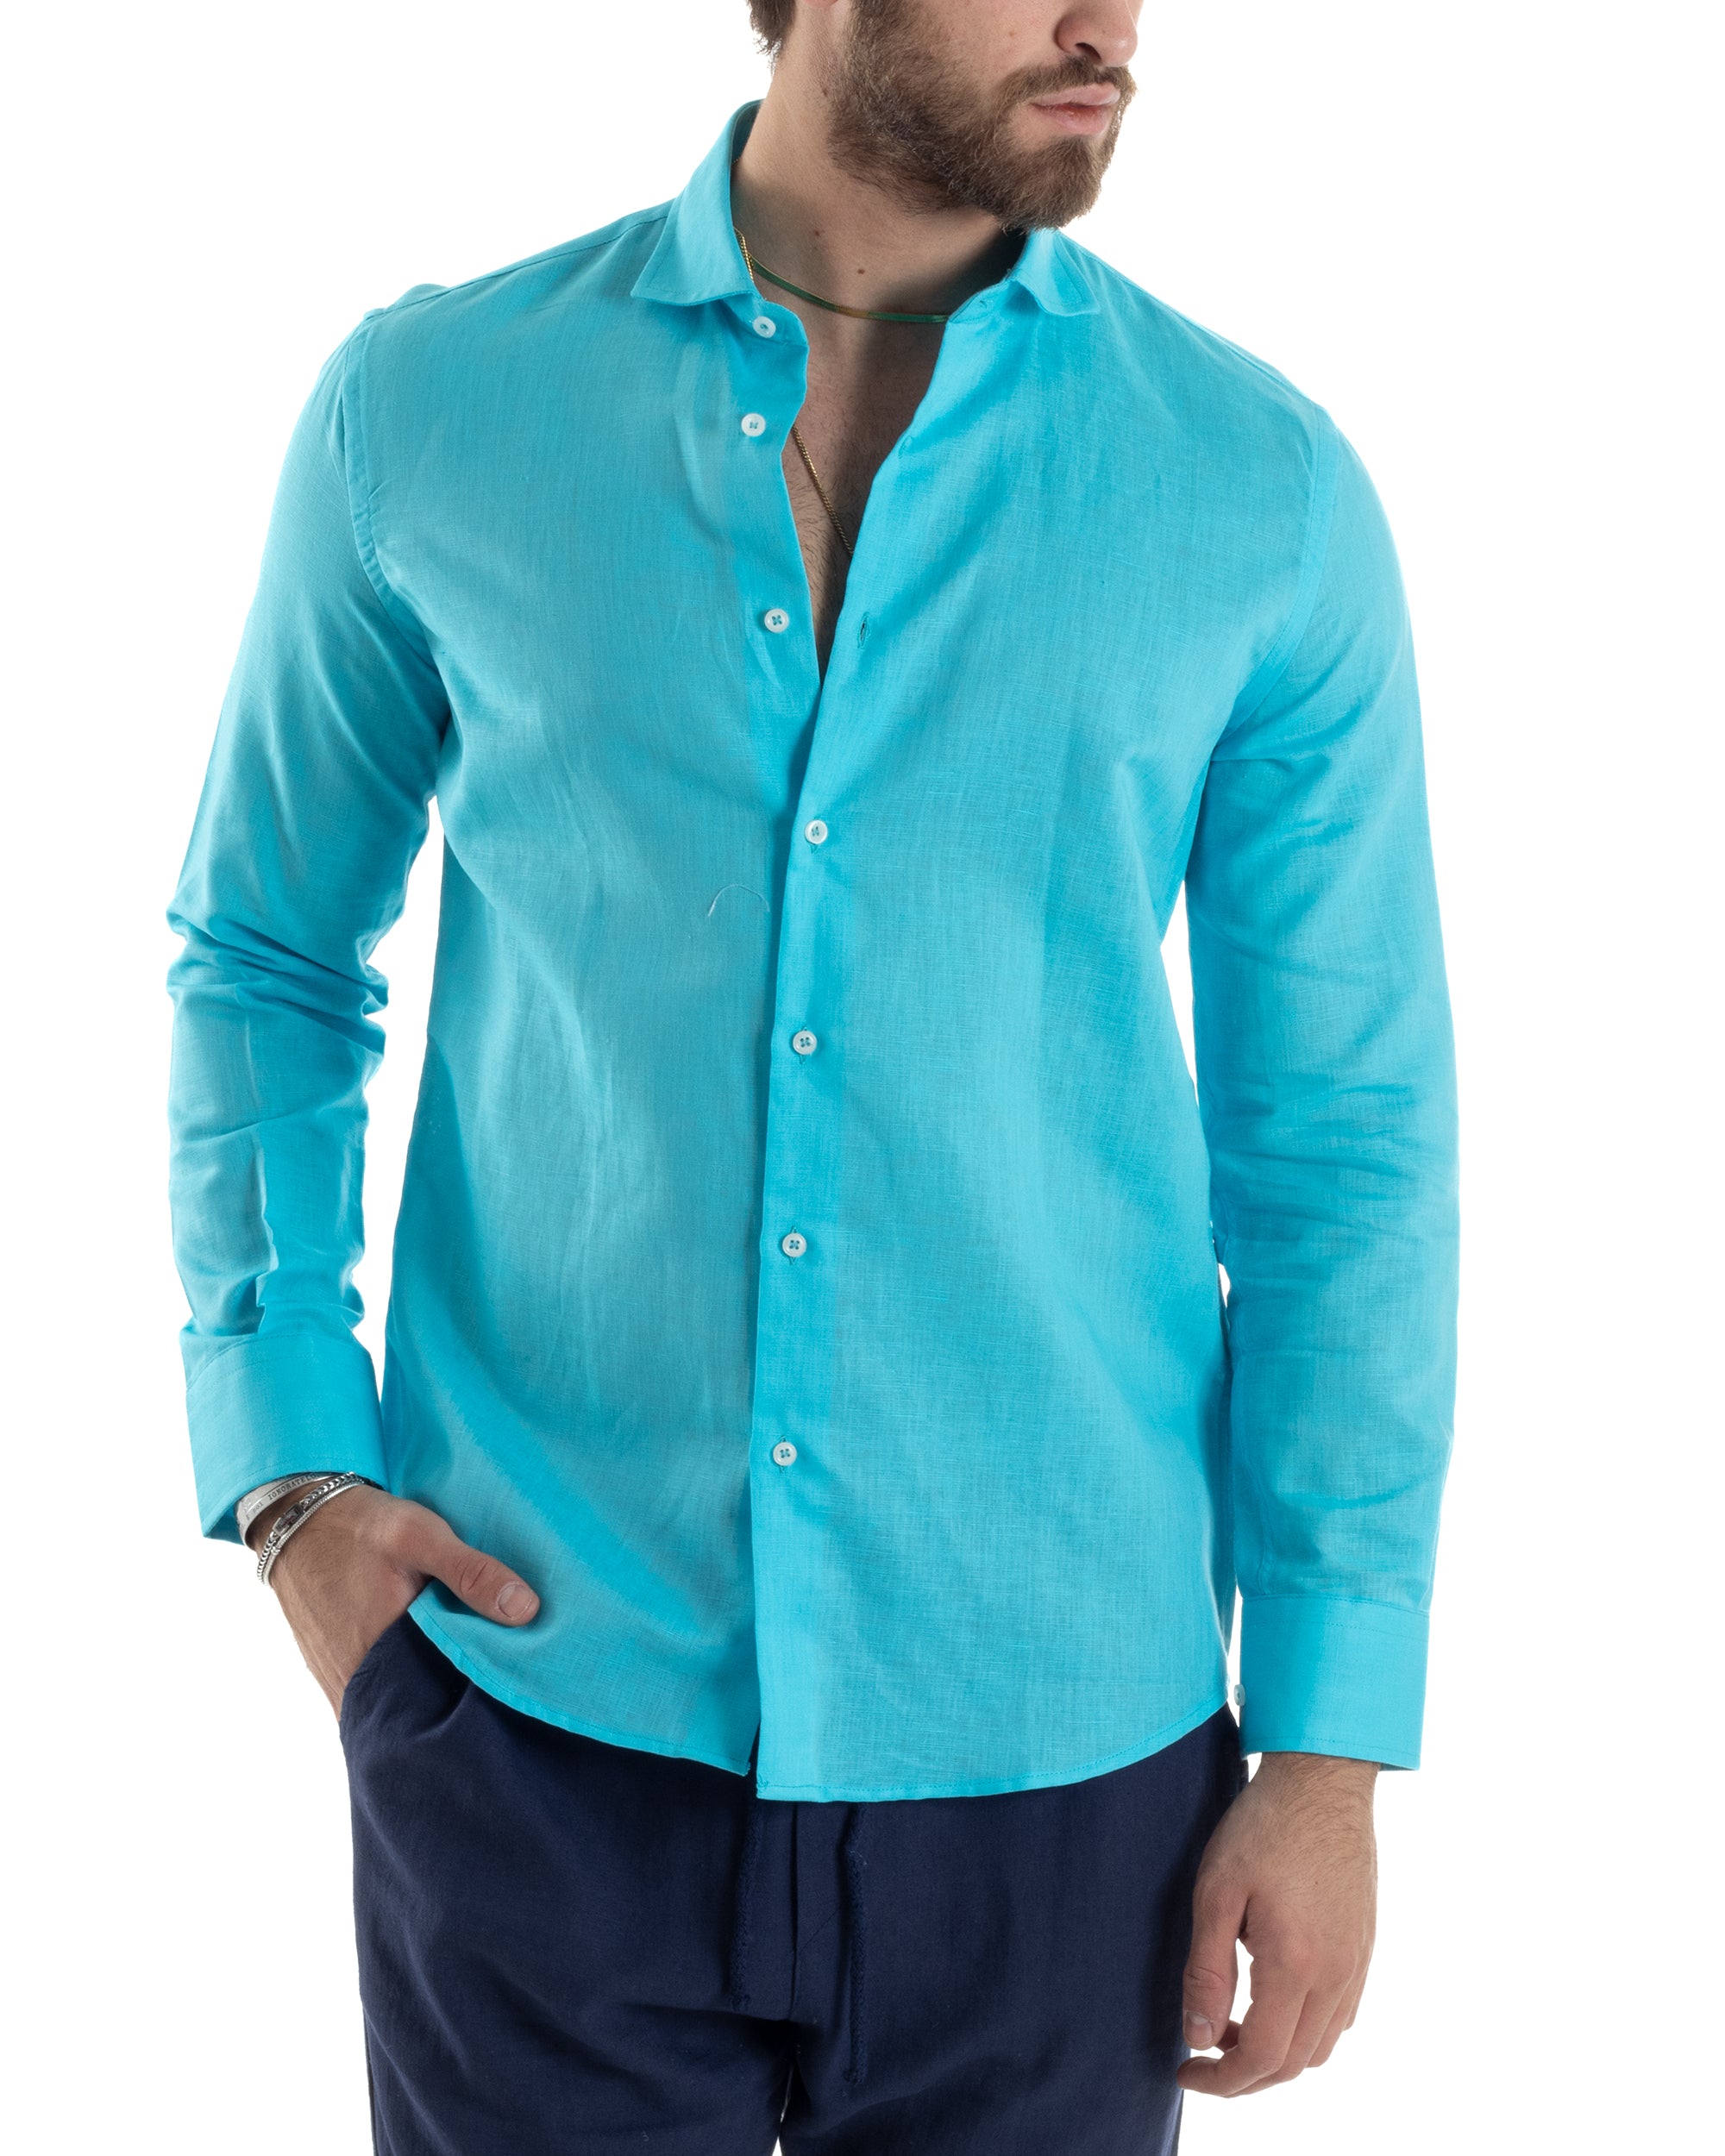 Men's Shirt With Collar Solid Color Turquoise Linen Long Sleeve Casual Tailored GIOSAL-C2726A